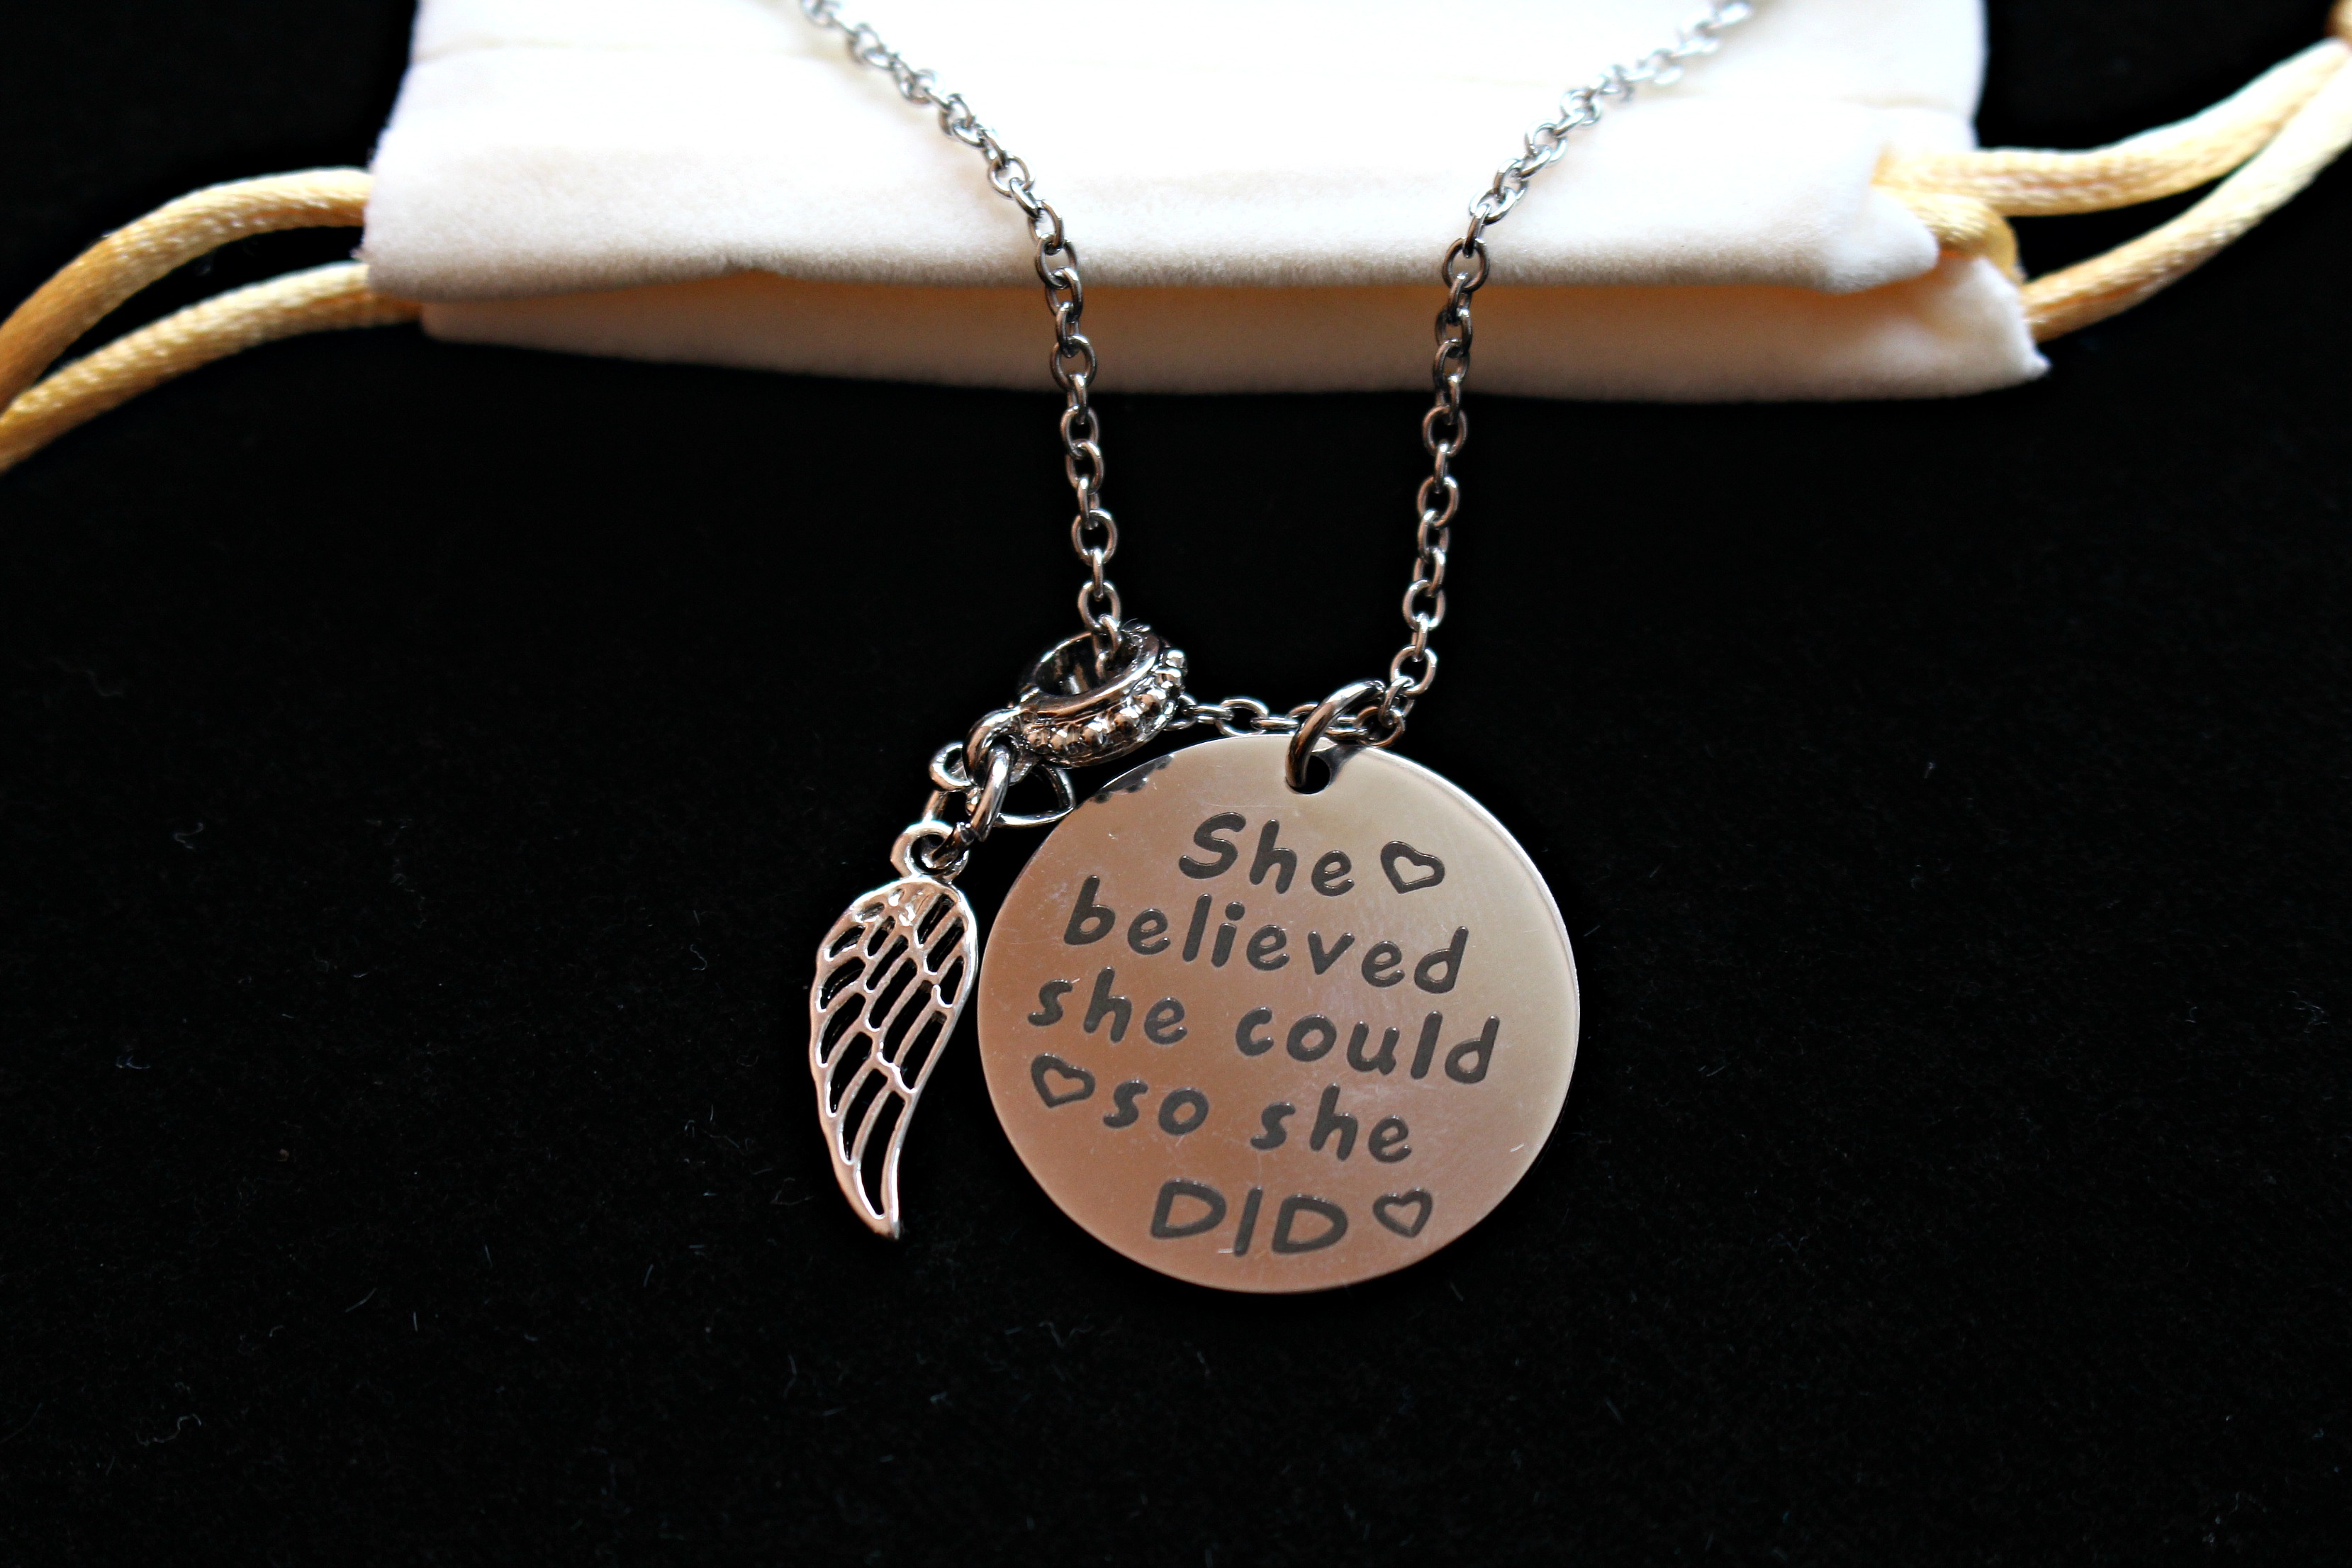 Necklace with silver colored disc charm with motivational quote.